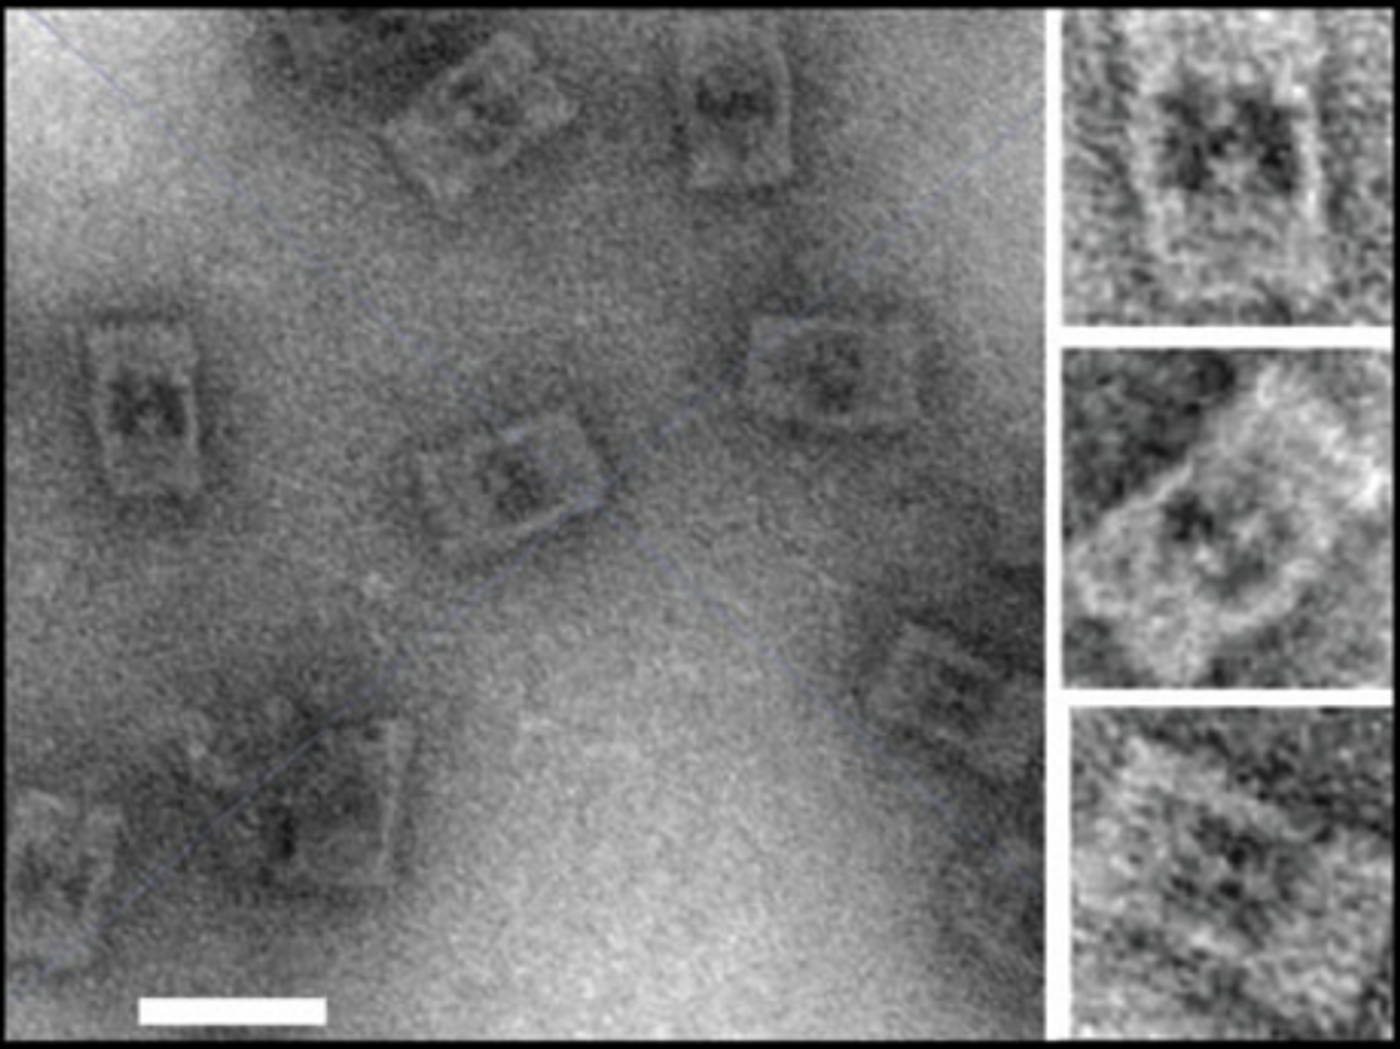 Transmission electron microscopy images of the DNA nanocages.